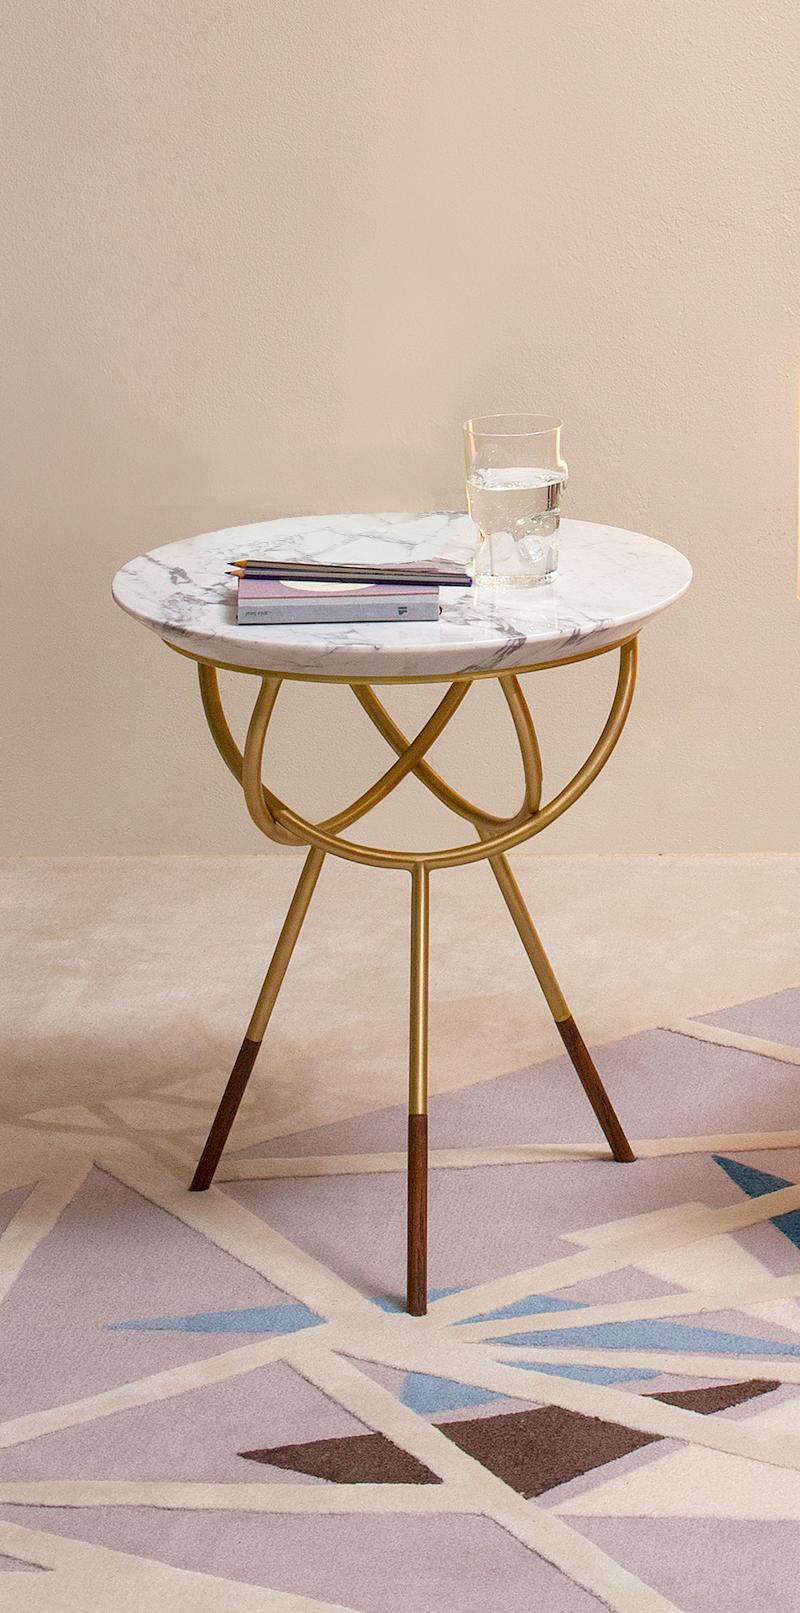 Oak Atlas Brushed Brass Side Table with White Marble Top by Avram Rusu Studio For Sale